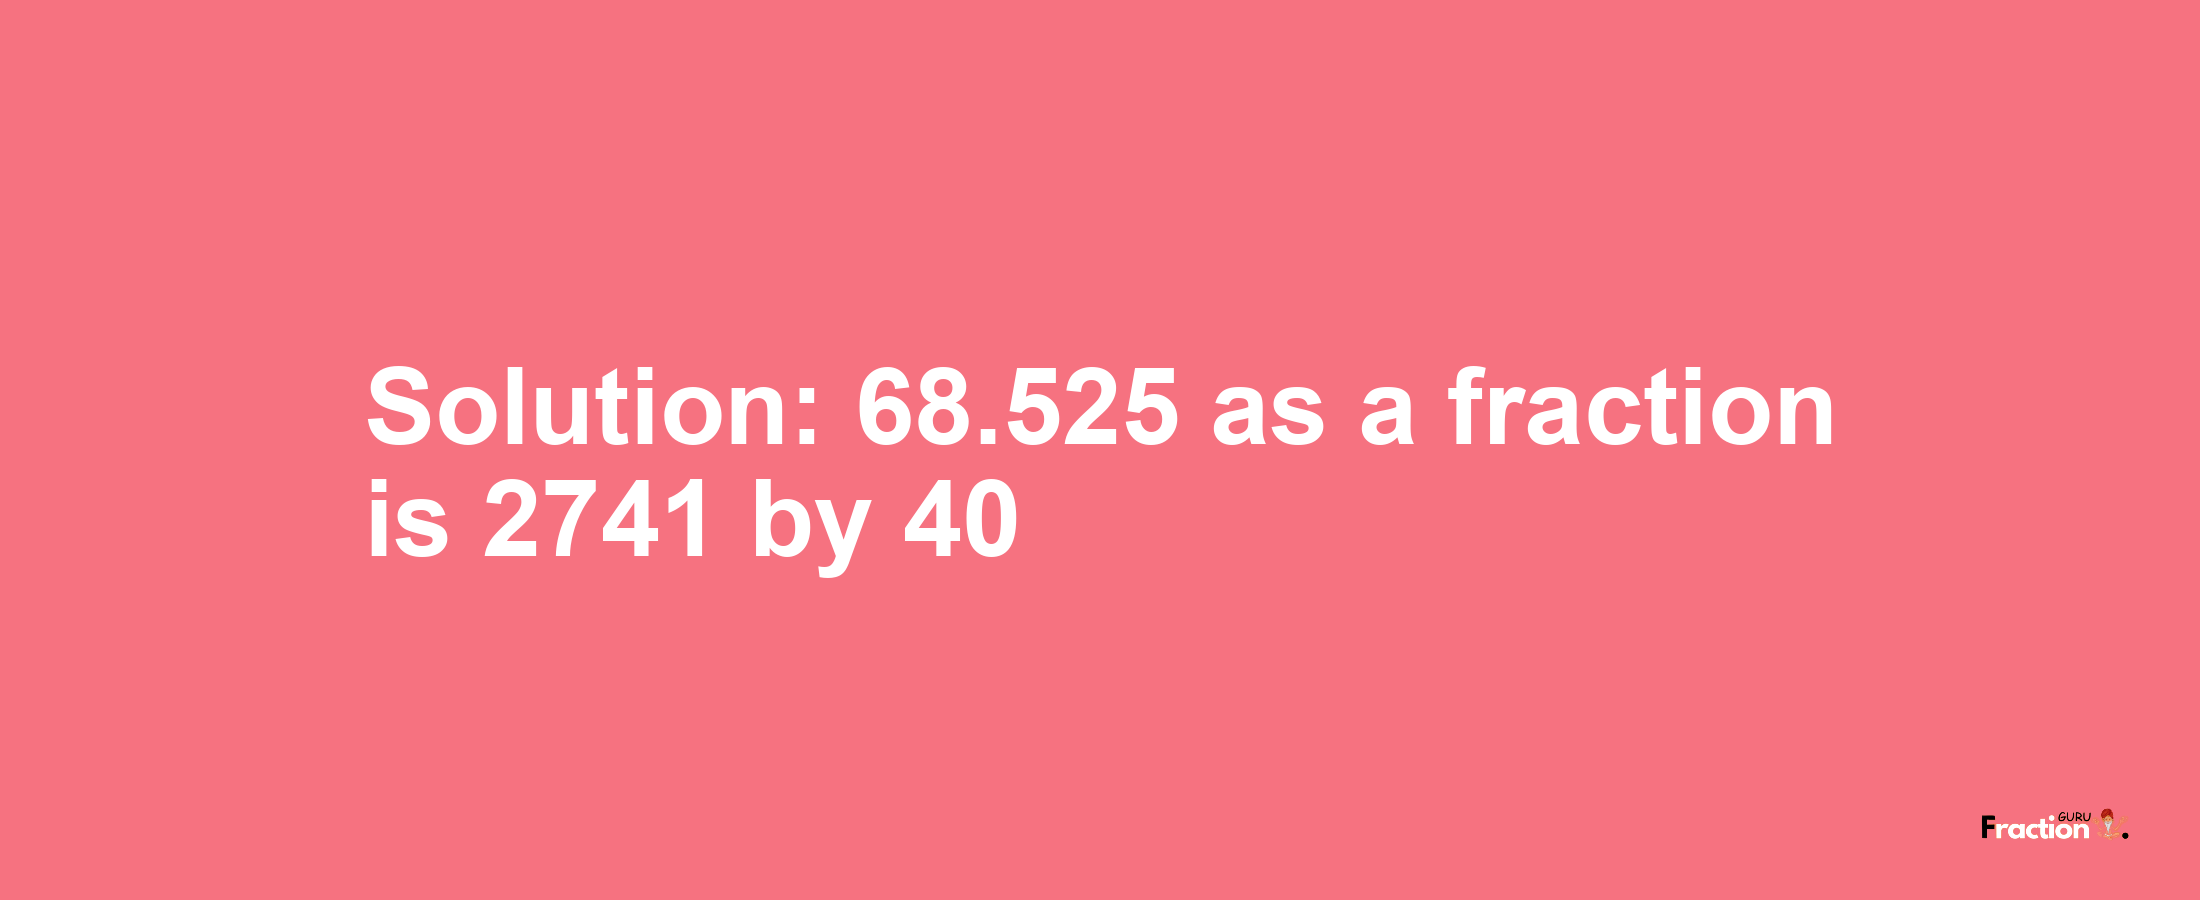 Solution:68.525 as a fraction is 2741/40